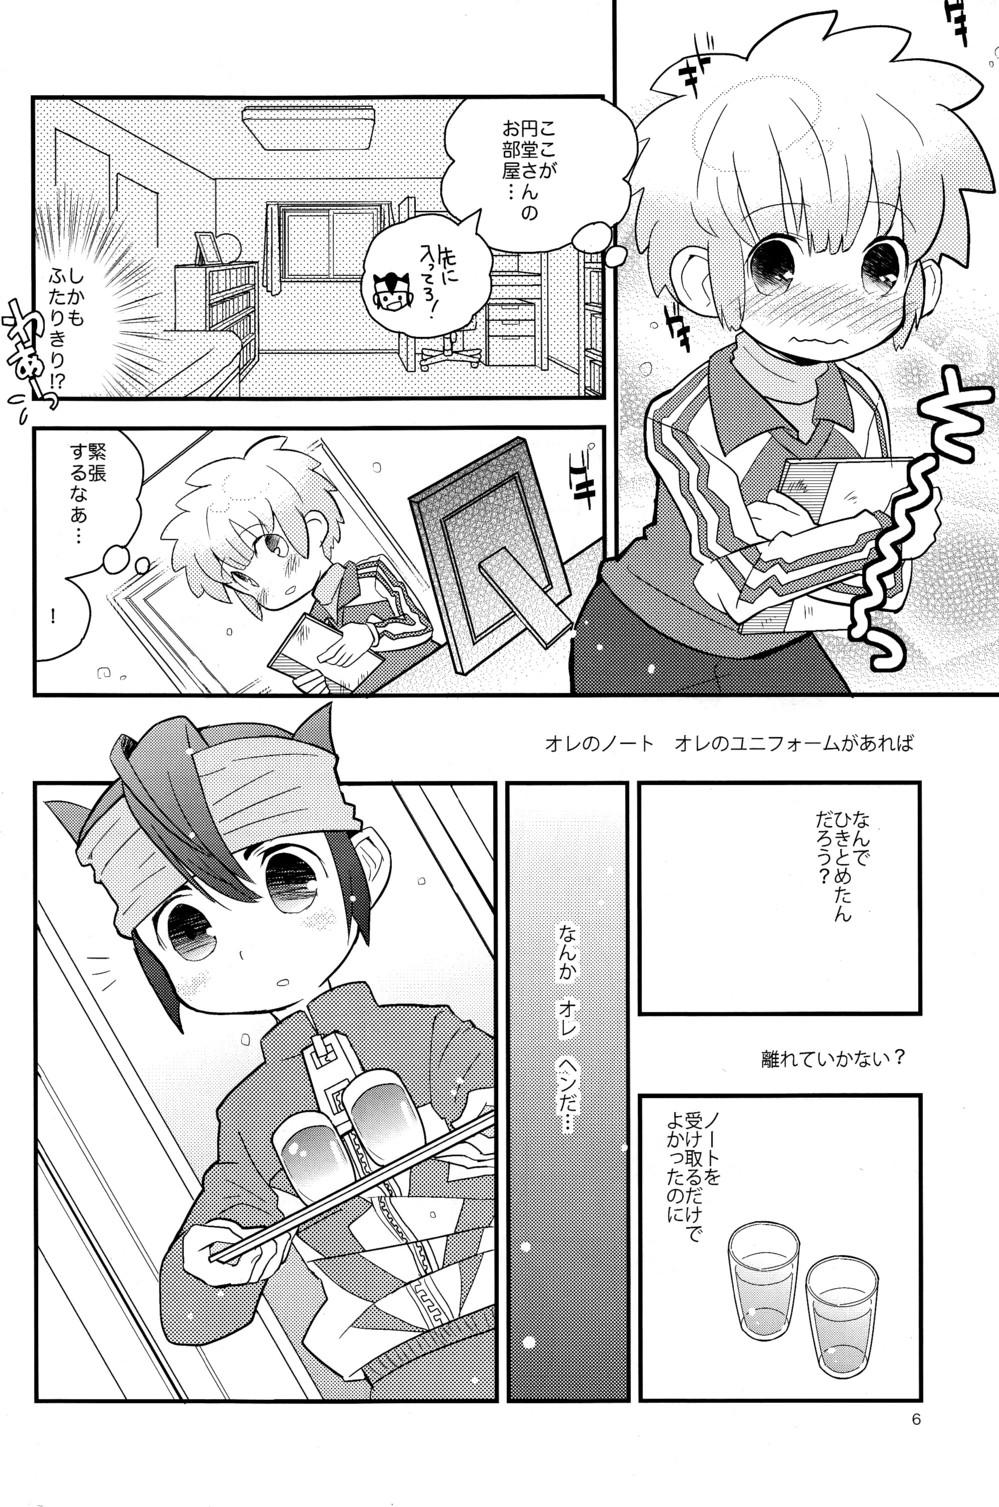 Cheating Wife 1 + 1 = Mugen Lovers!! - Inazuma eleven Amazing - Page 6